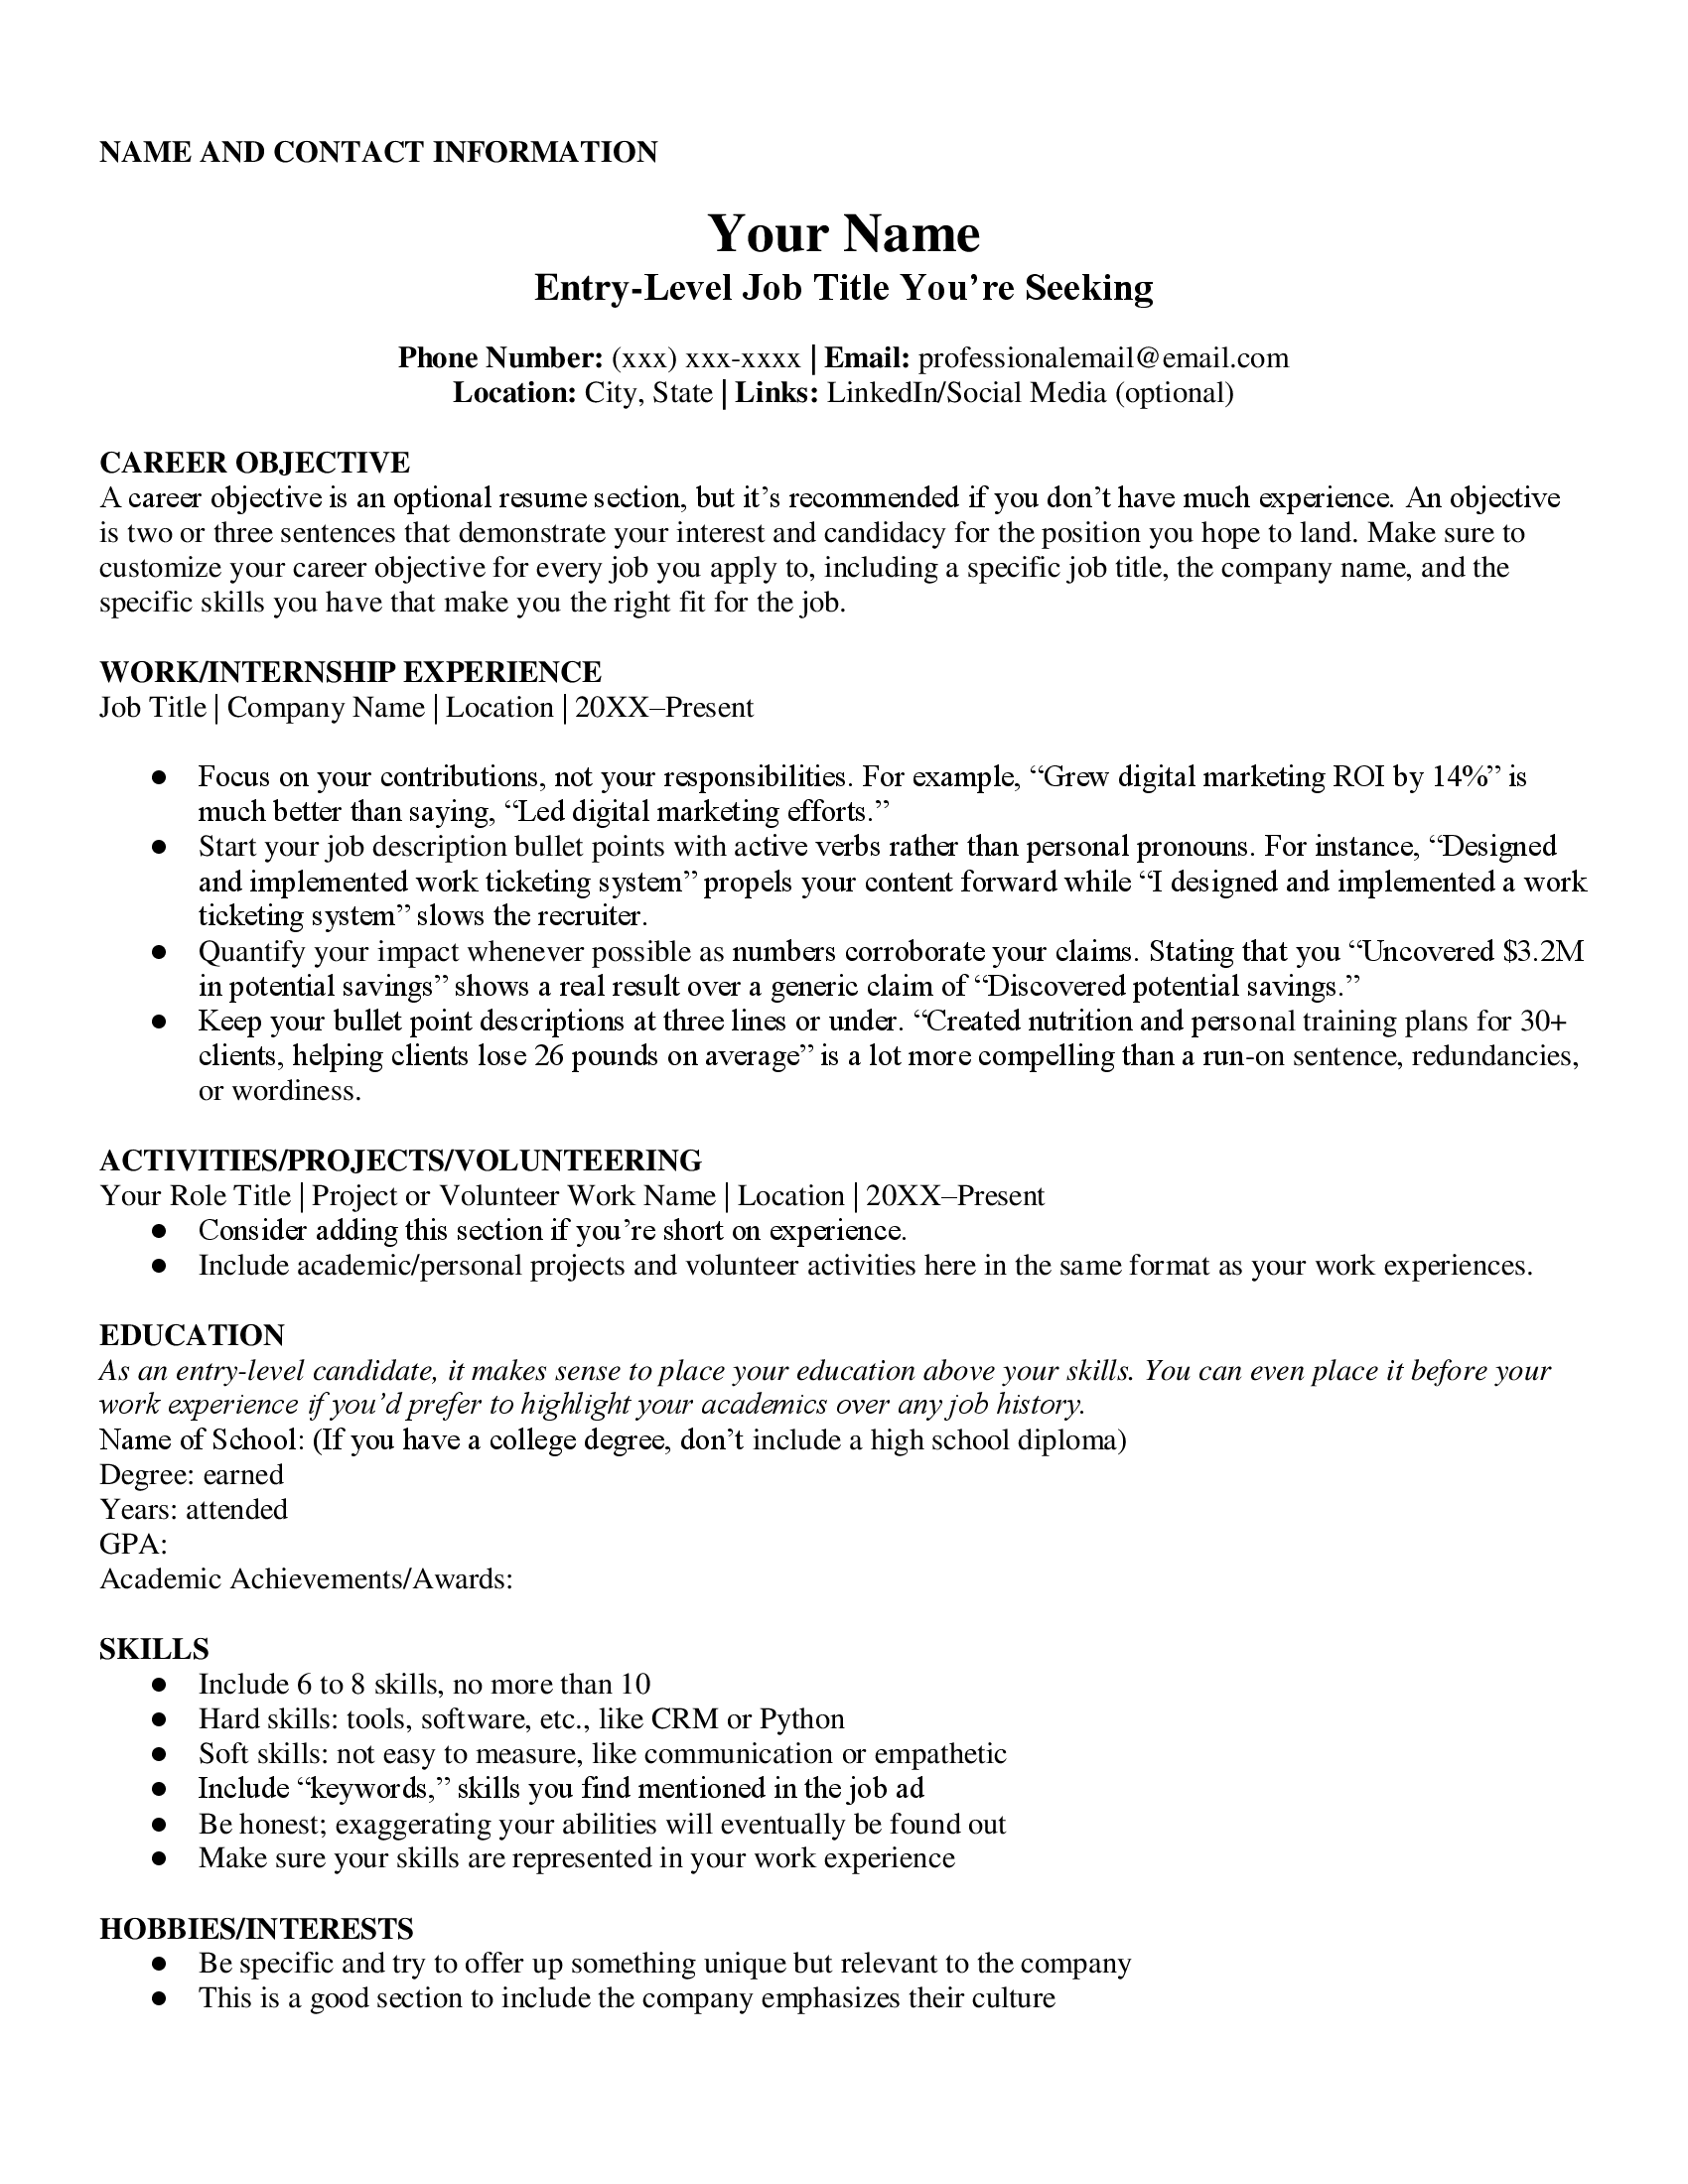 Basic resume outline example for entry-level job seekers